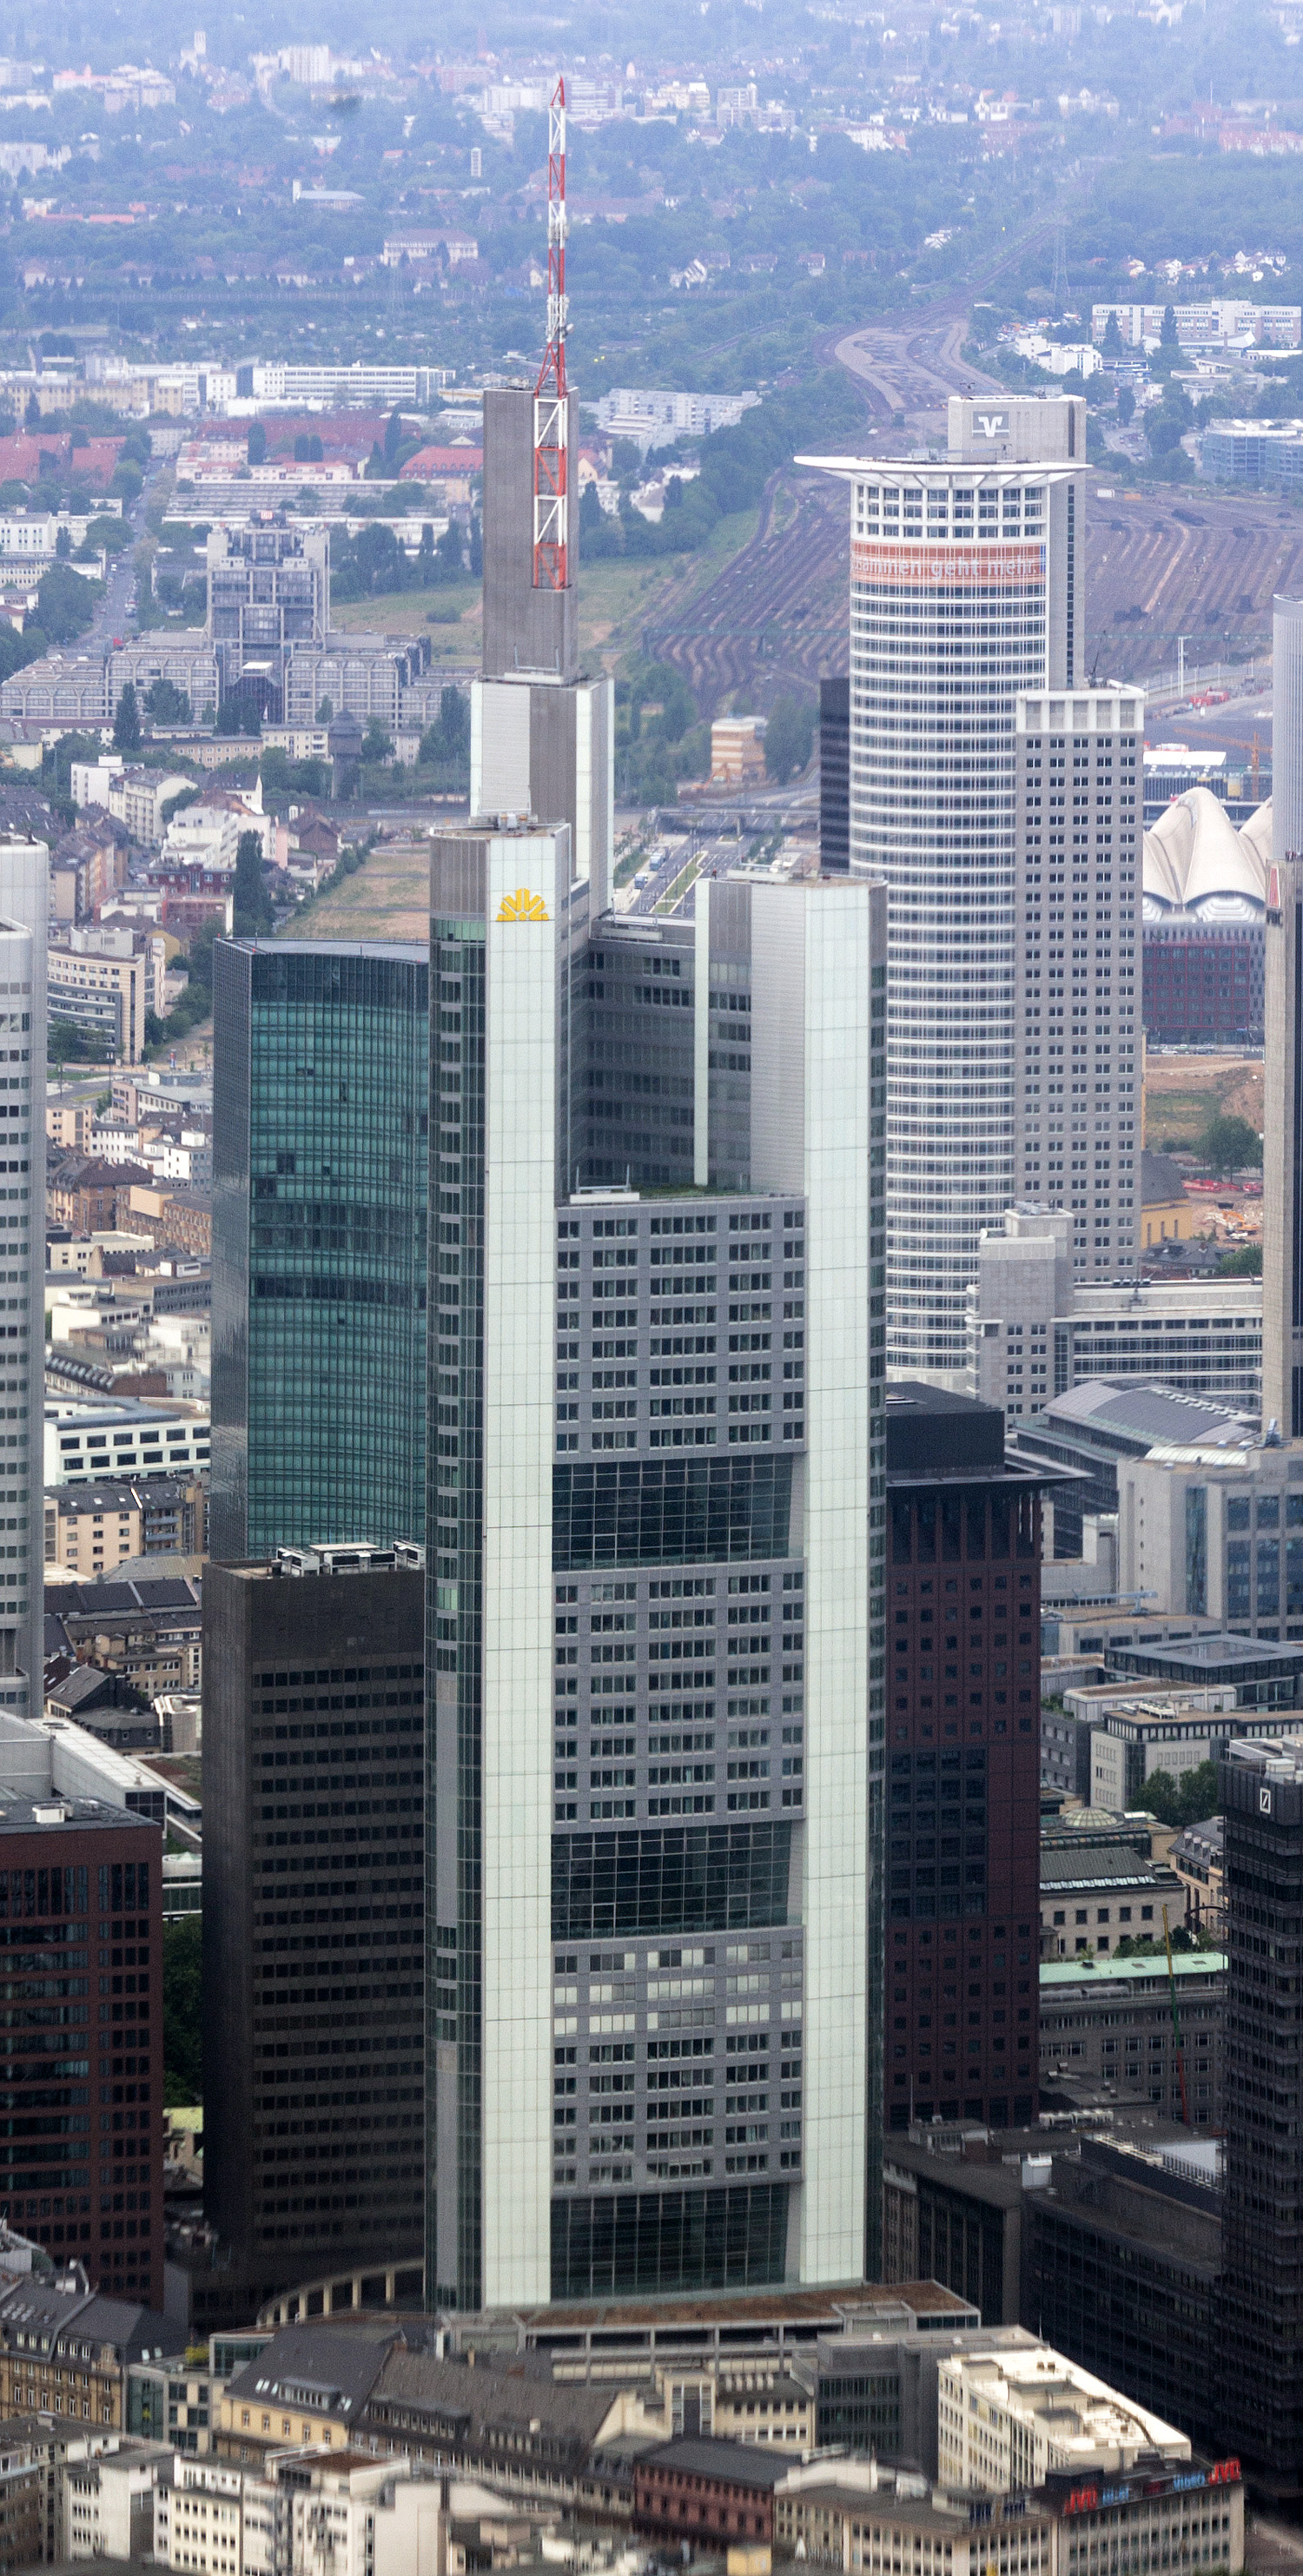 Commerzbank Tower, Frankfurt - View from a helicopter. © Mathias Beinling